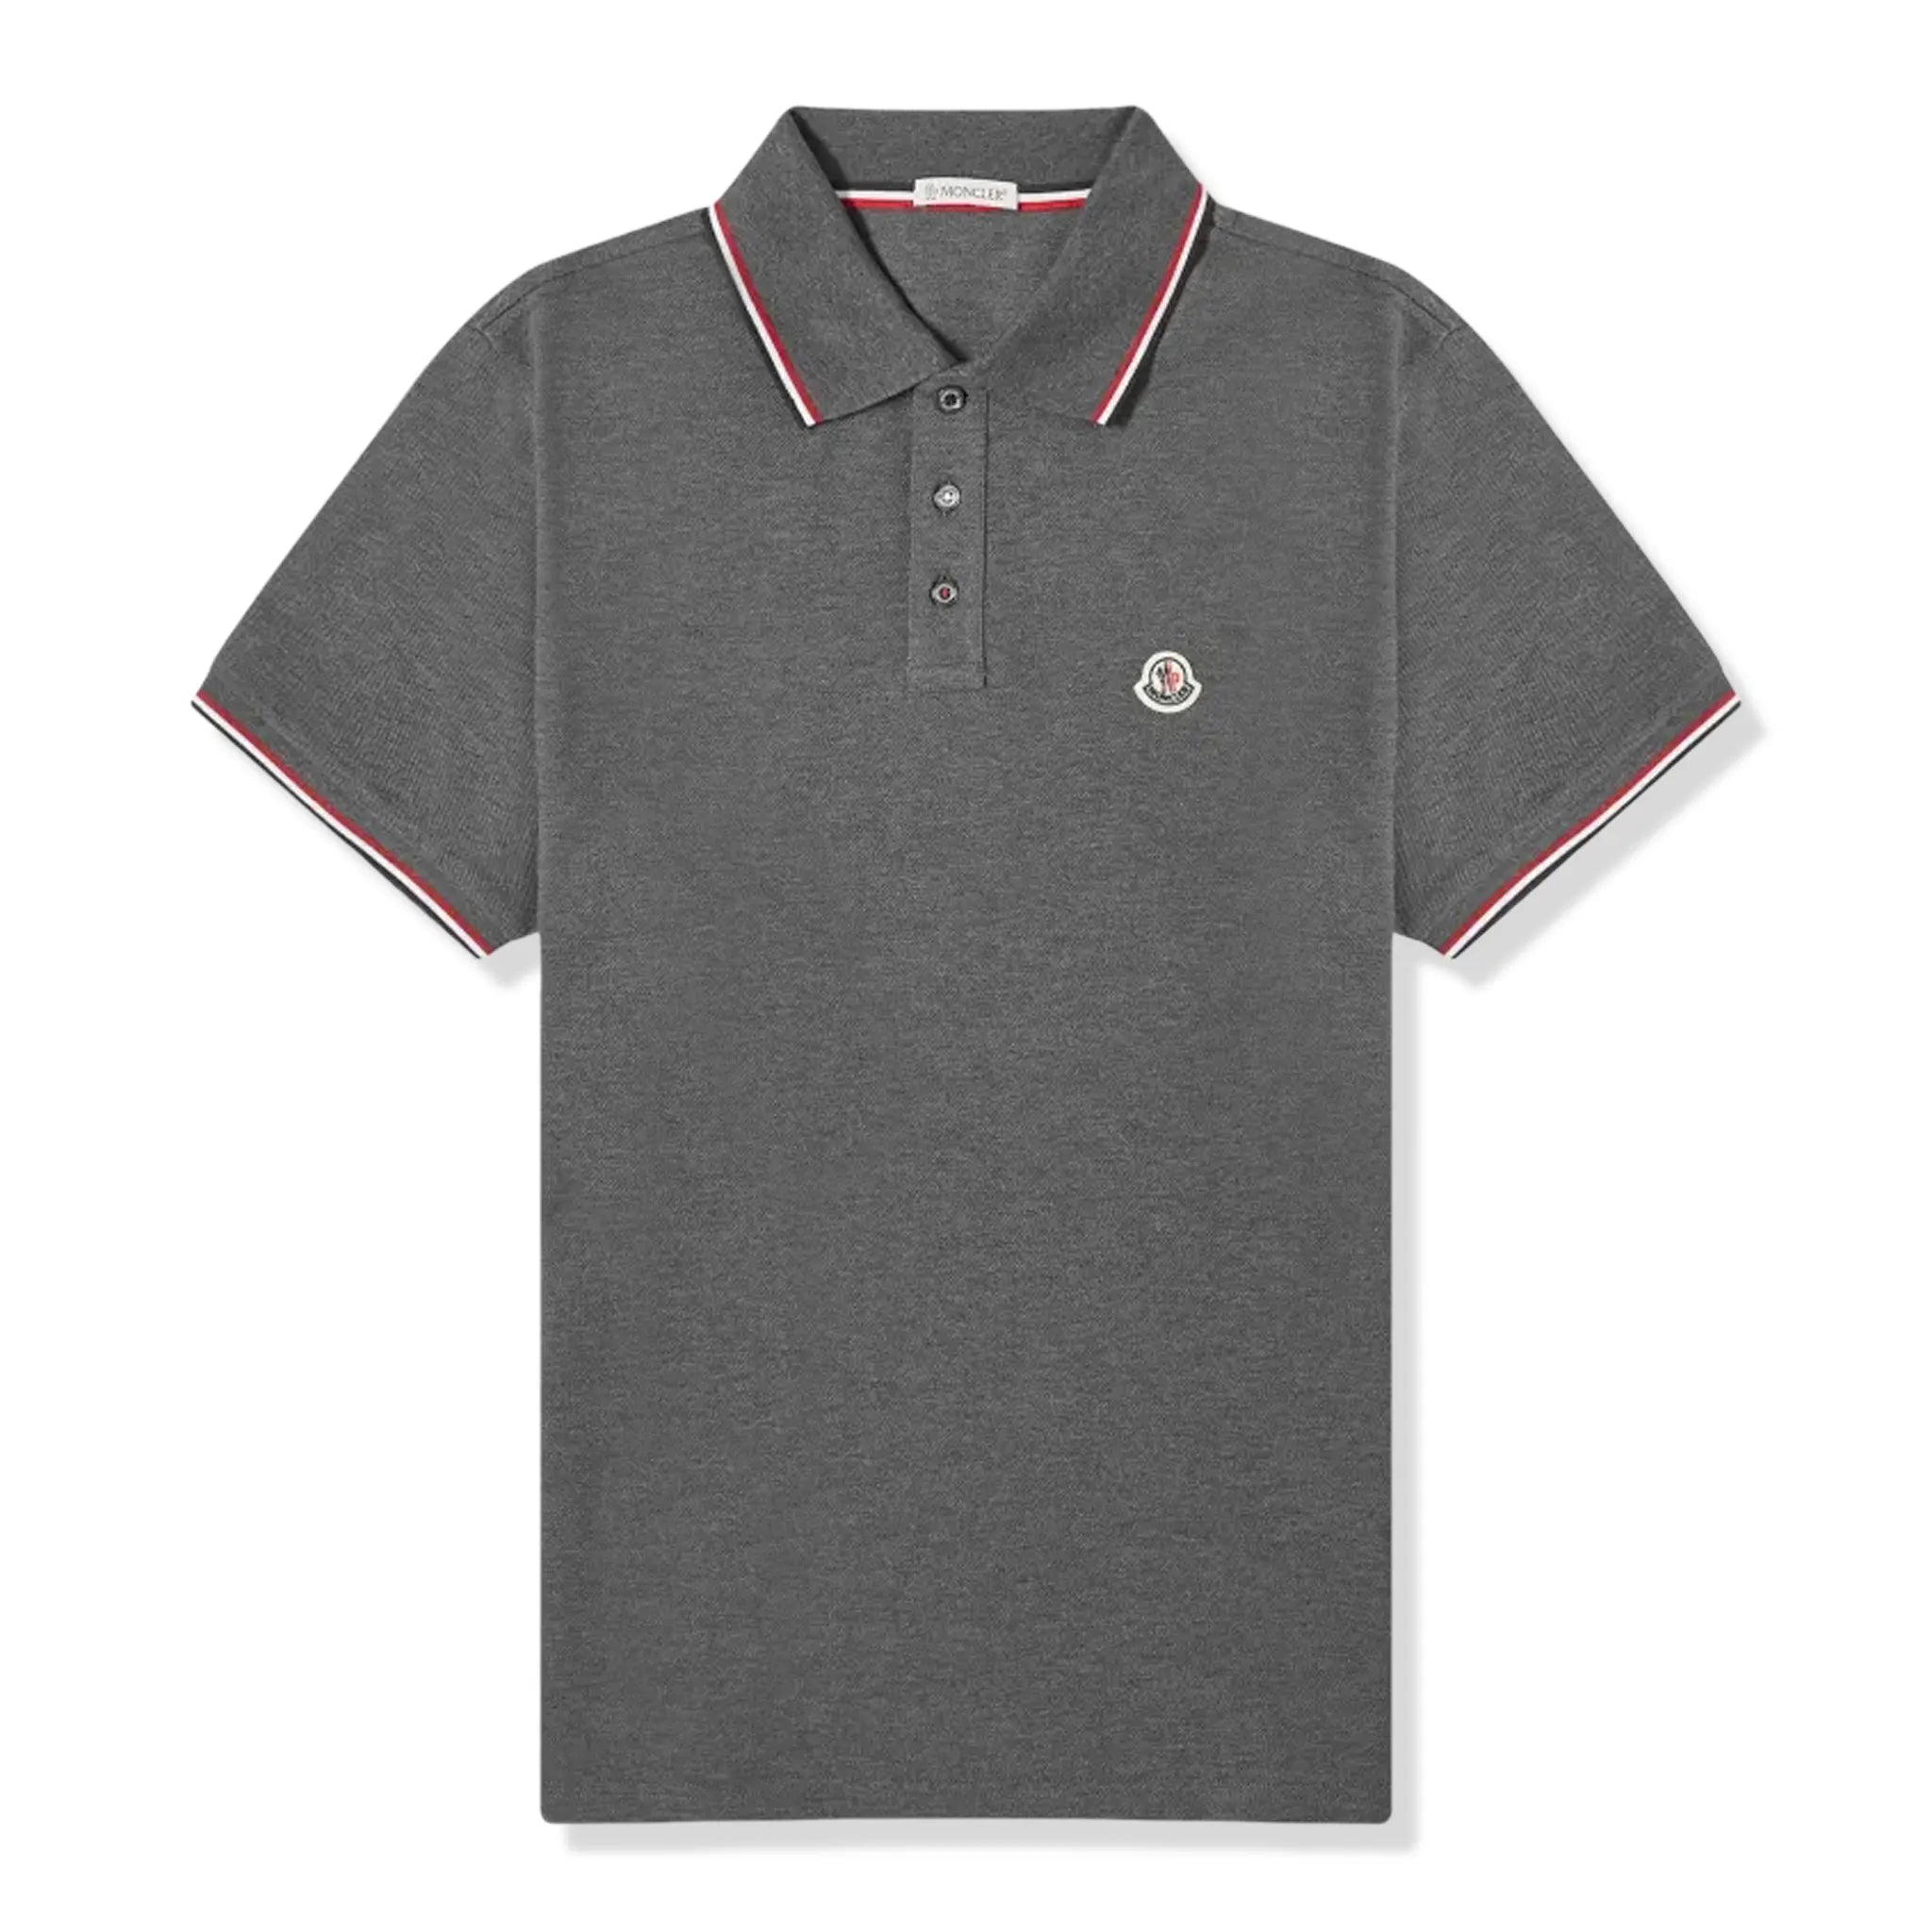 Front view of Moncler Maglia Dark Grey Polo Shirt lange J10918A7030084556989